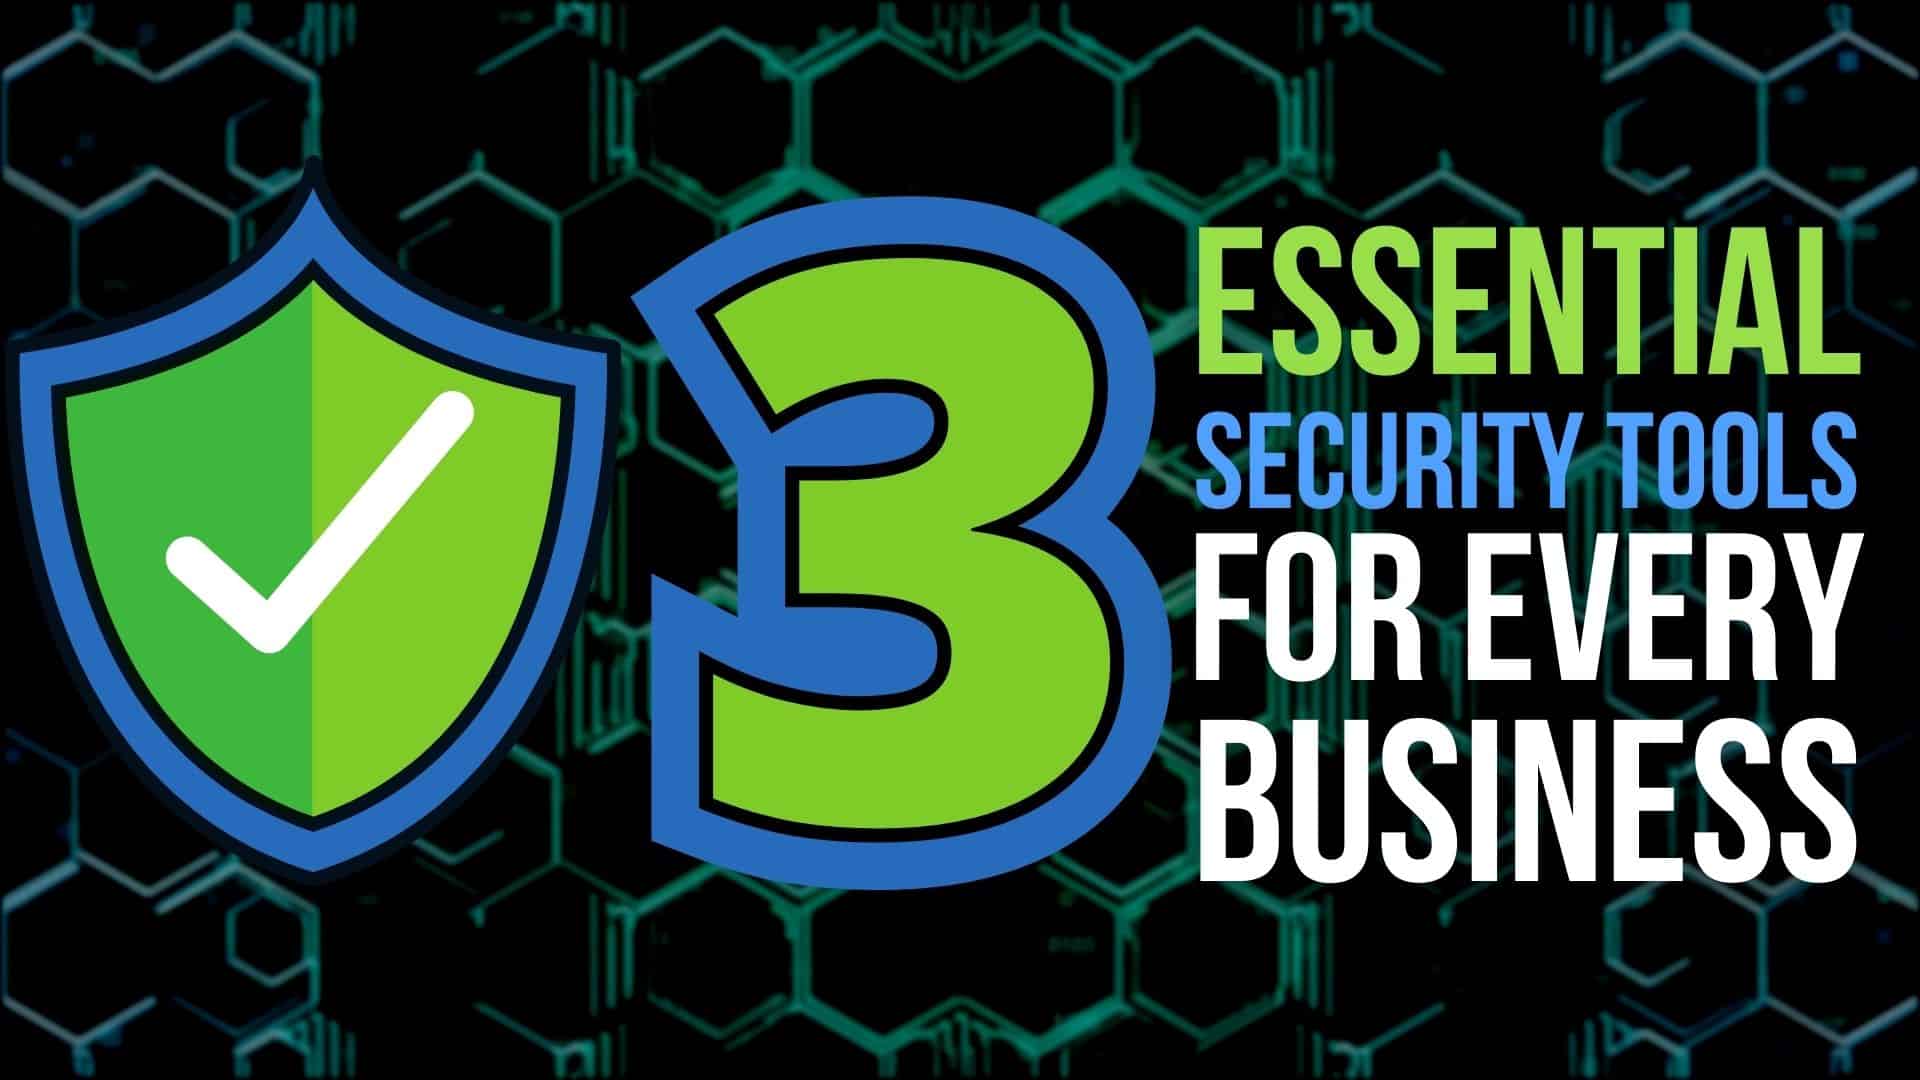 3 Essential Security Tools for Every Business